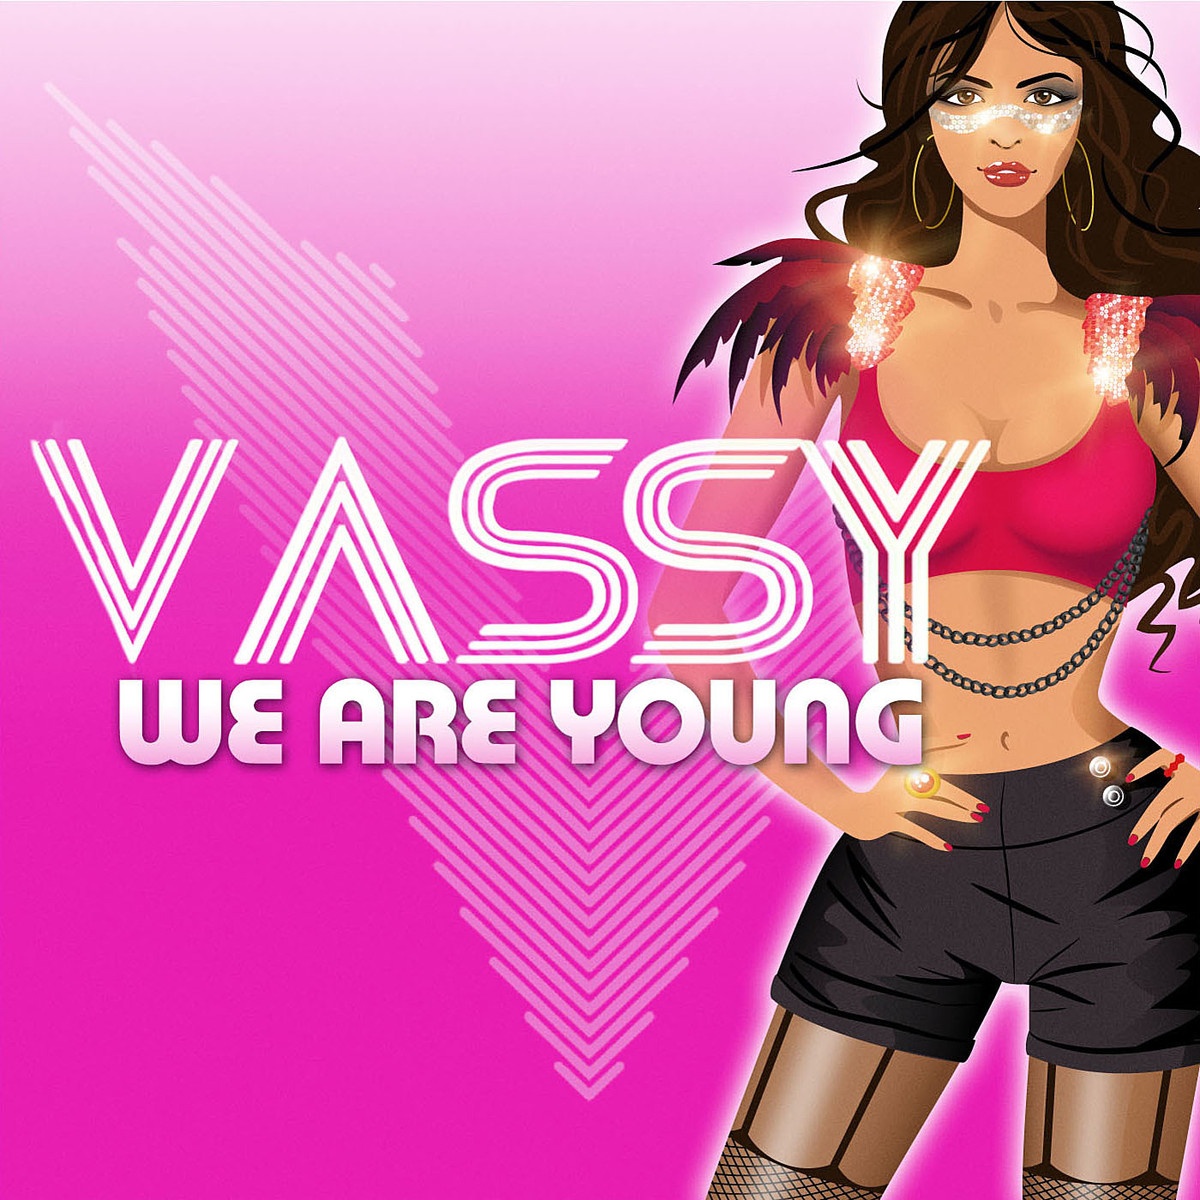 We Are Young (Ivan Gomez Club Mix)